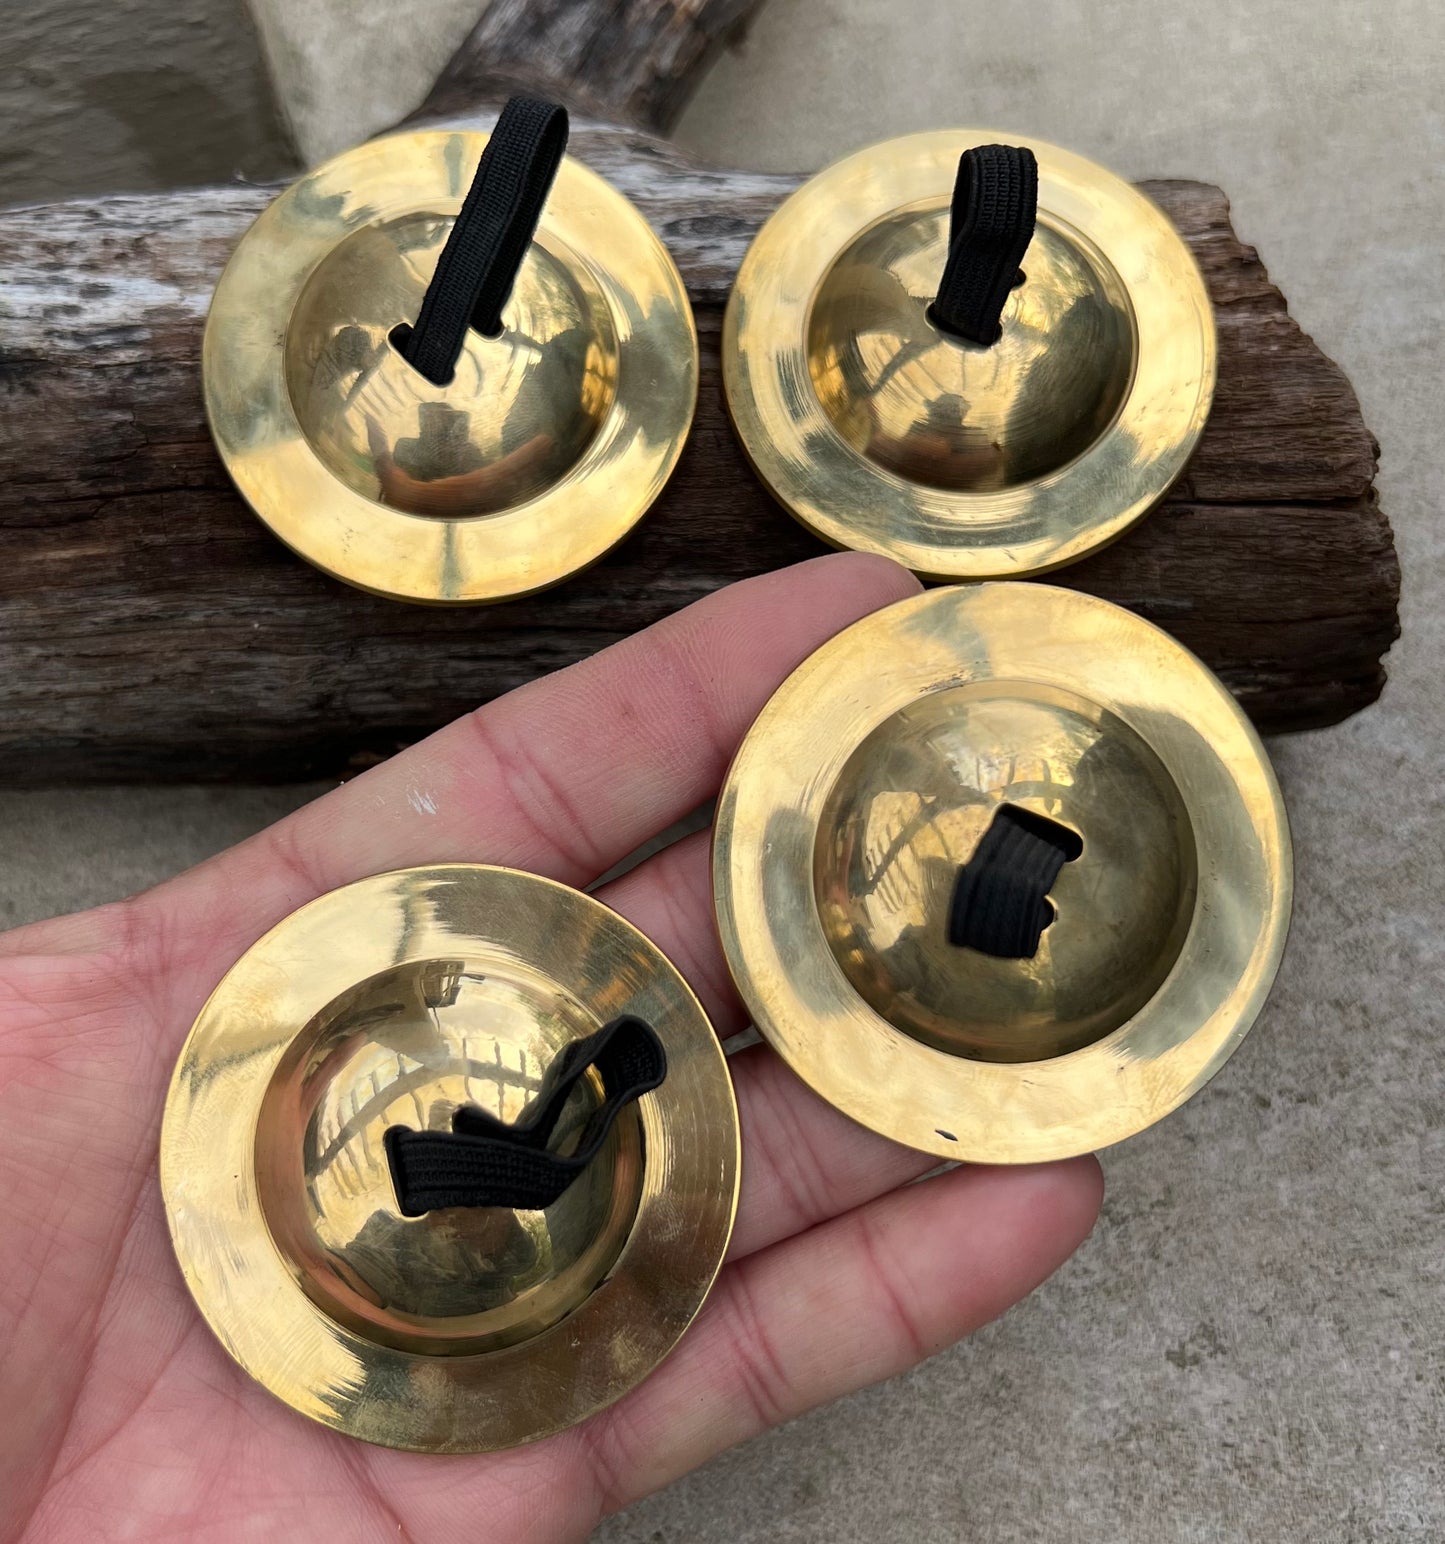 2 Pairs Brass Finger Cymbals Zills for Belly Dancing